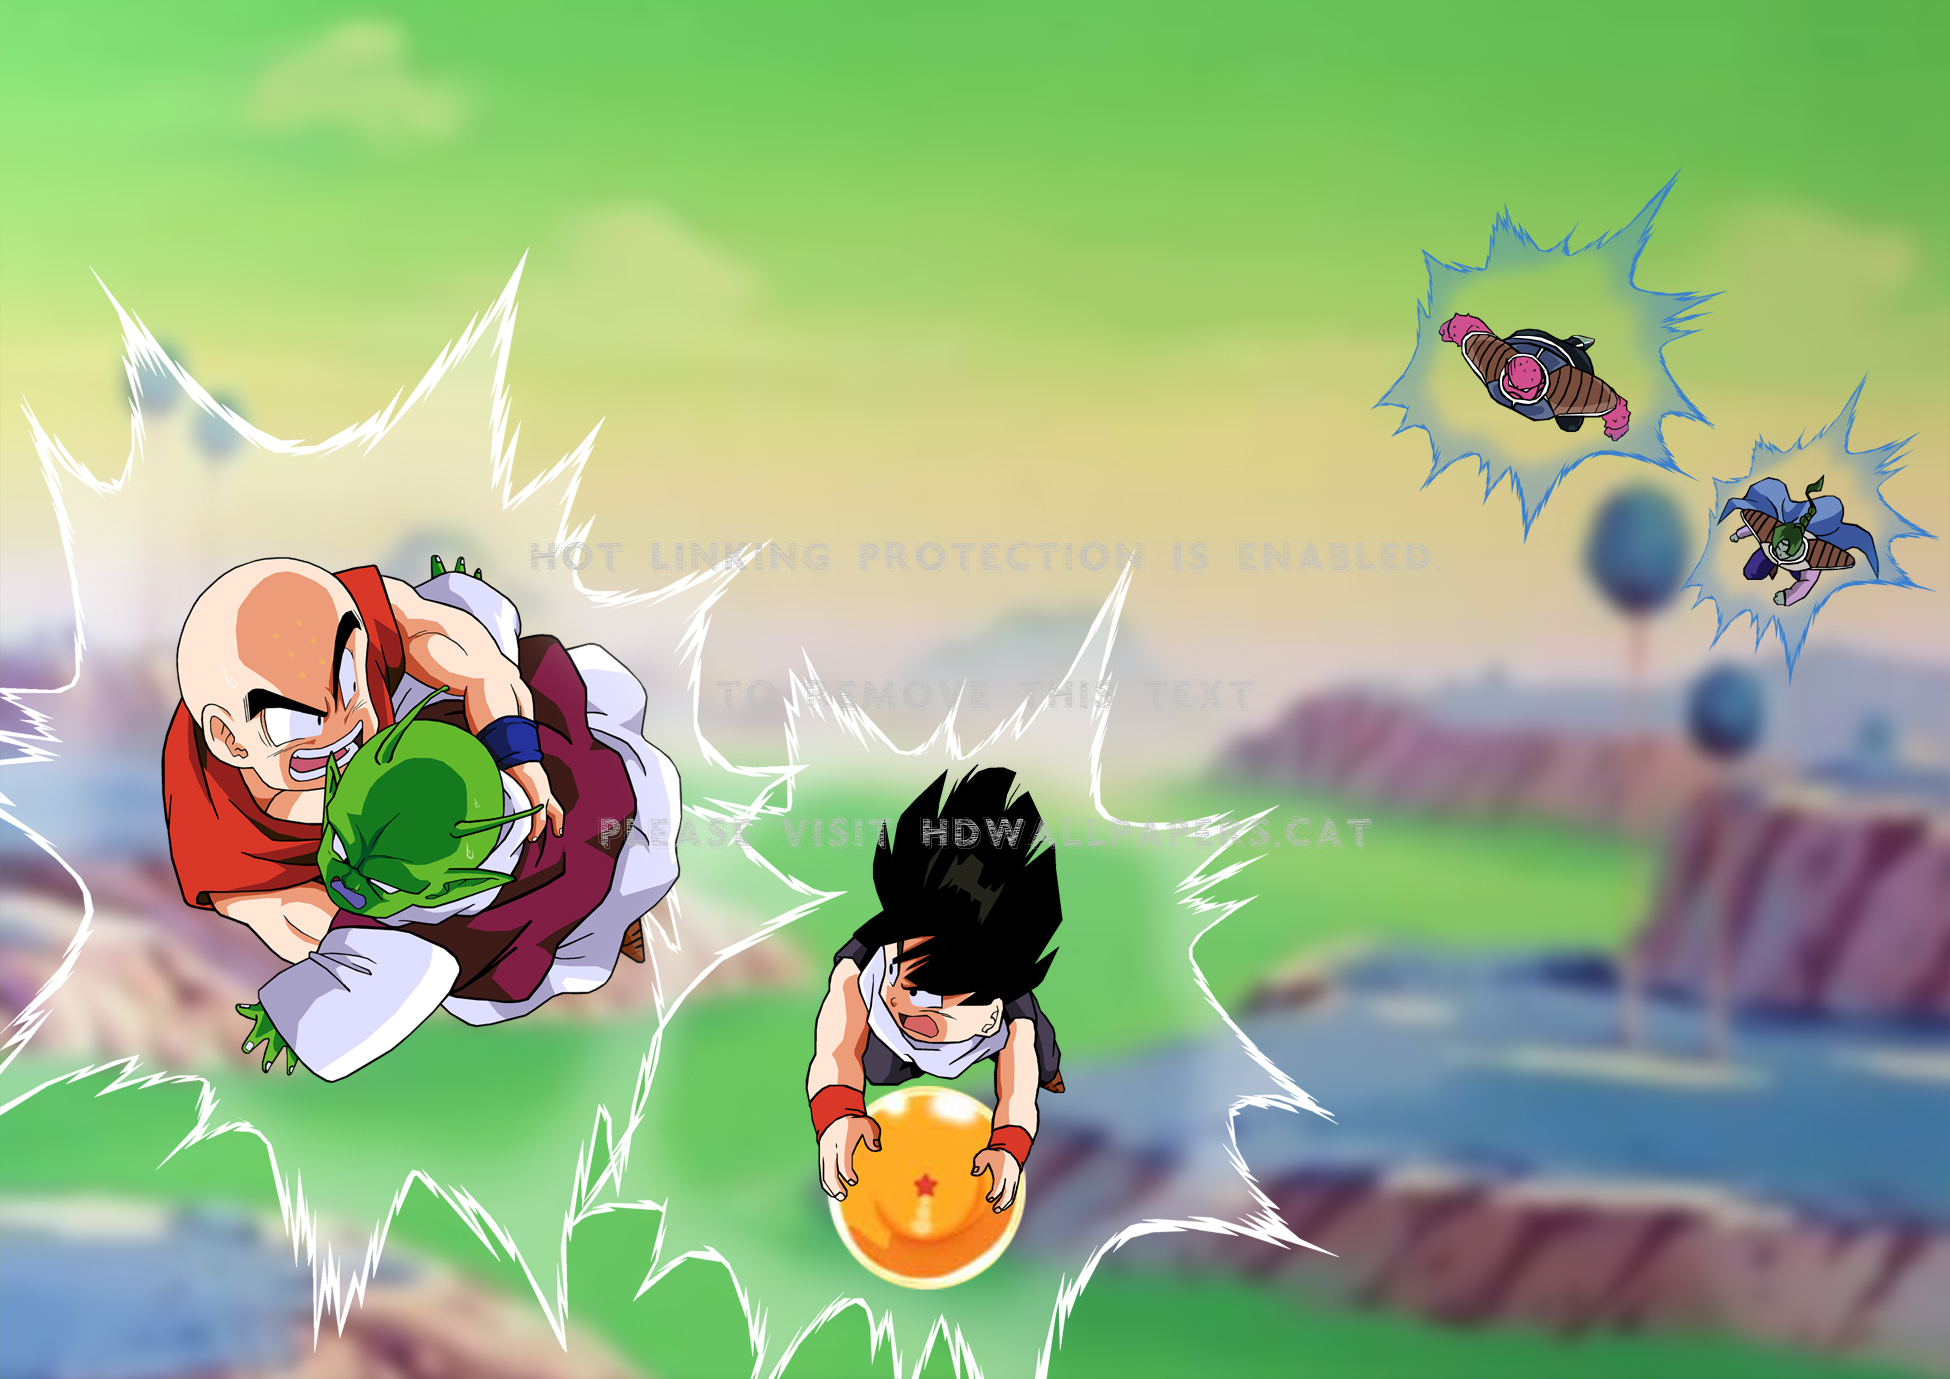 Krillin And Gohan Escaping From Zarbon